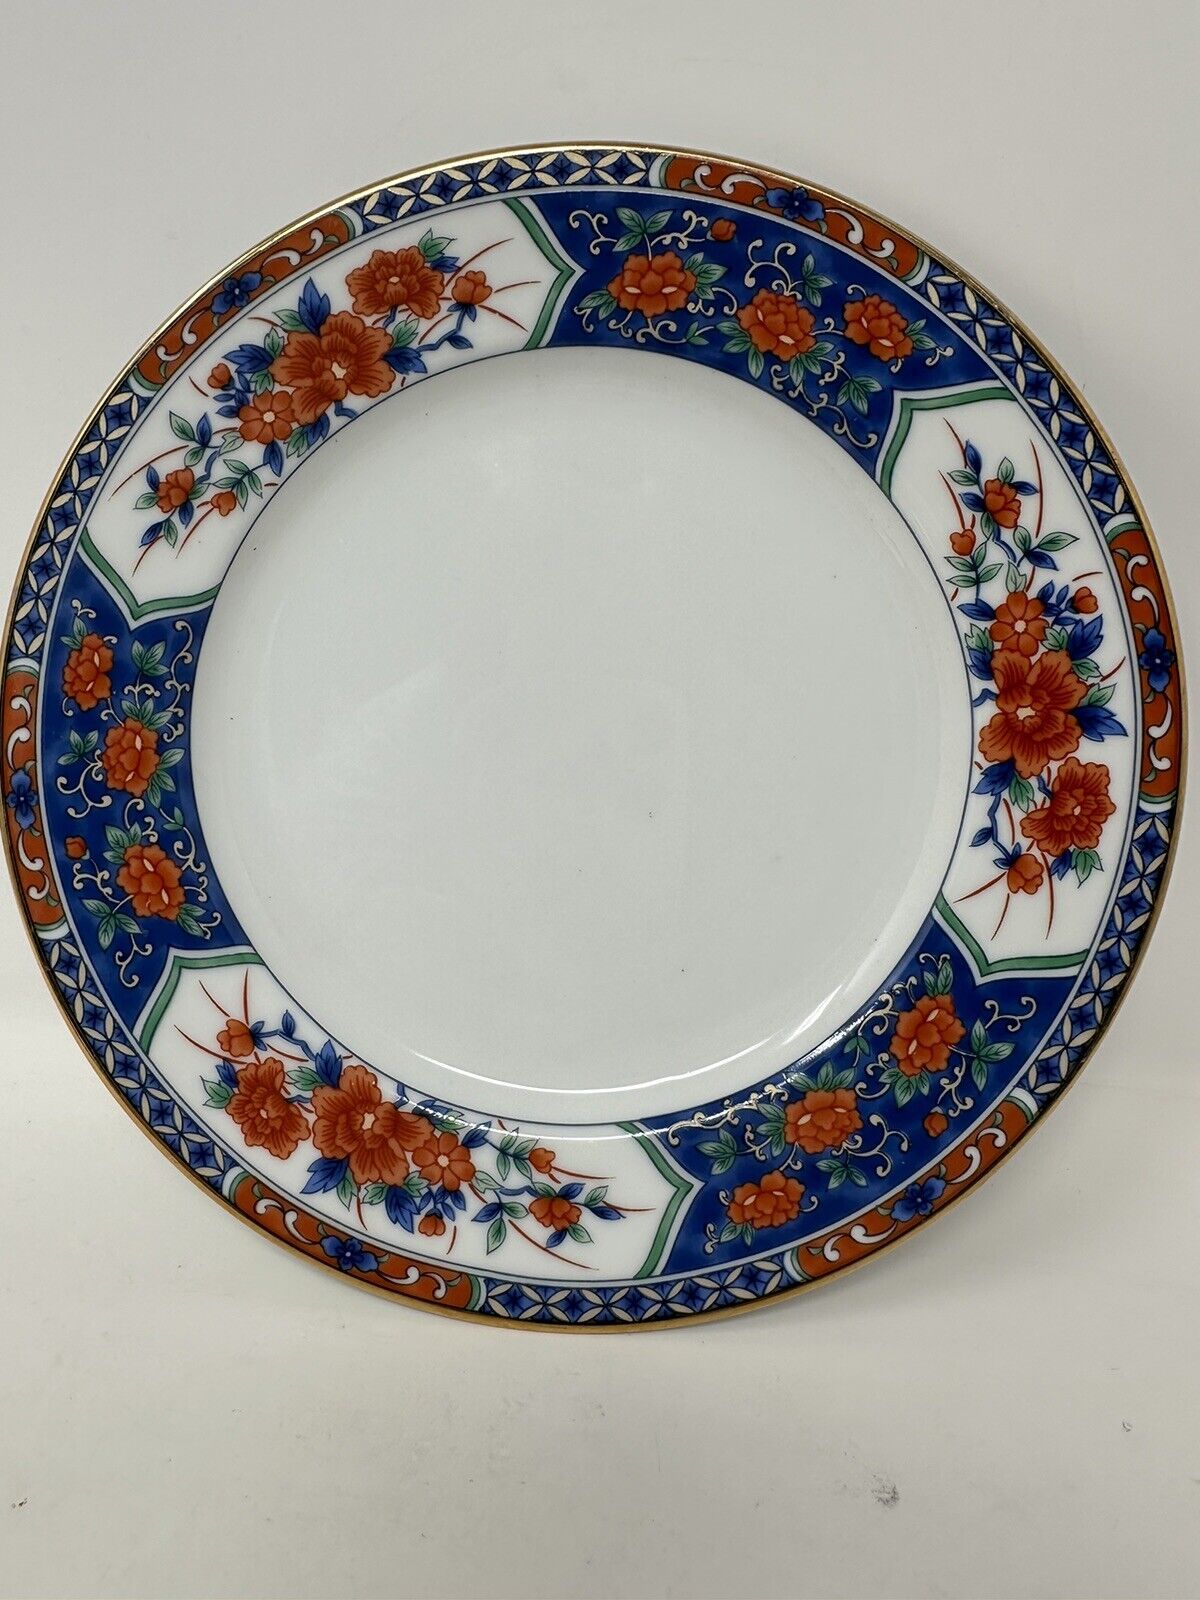 Tiffany and Co. Imari Asian Inspired Porcelain Blue and Red Floral Salad Plate